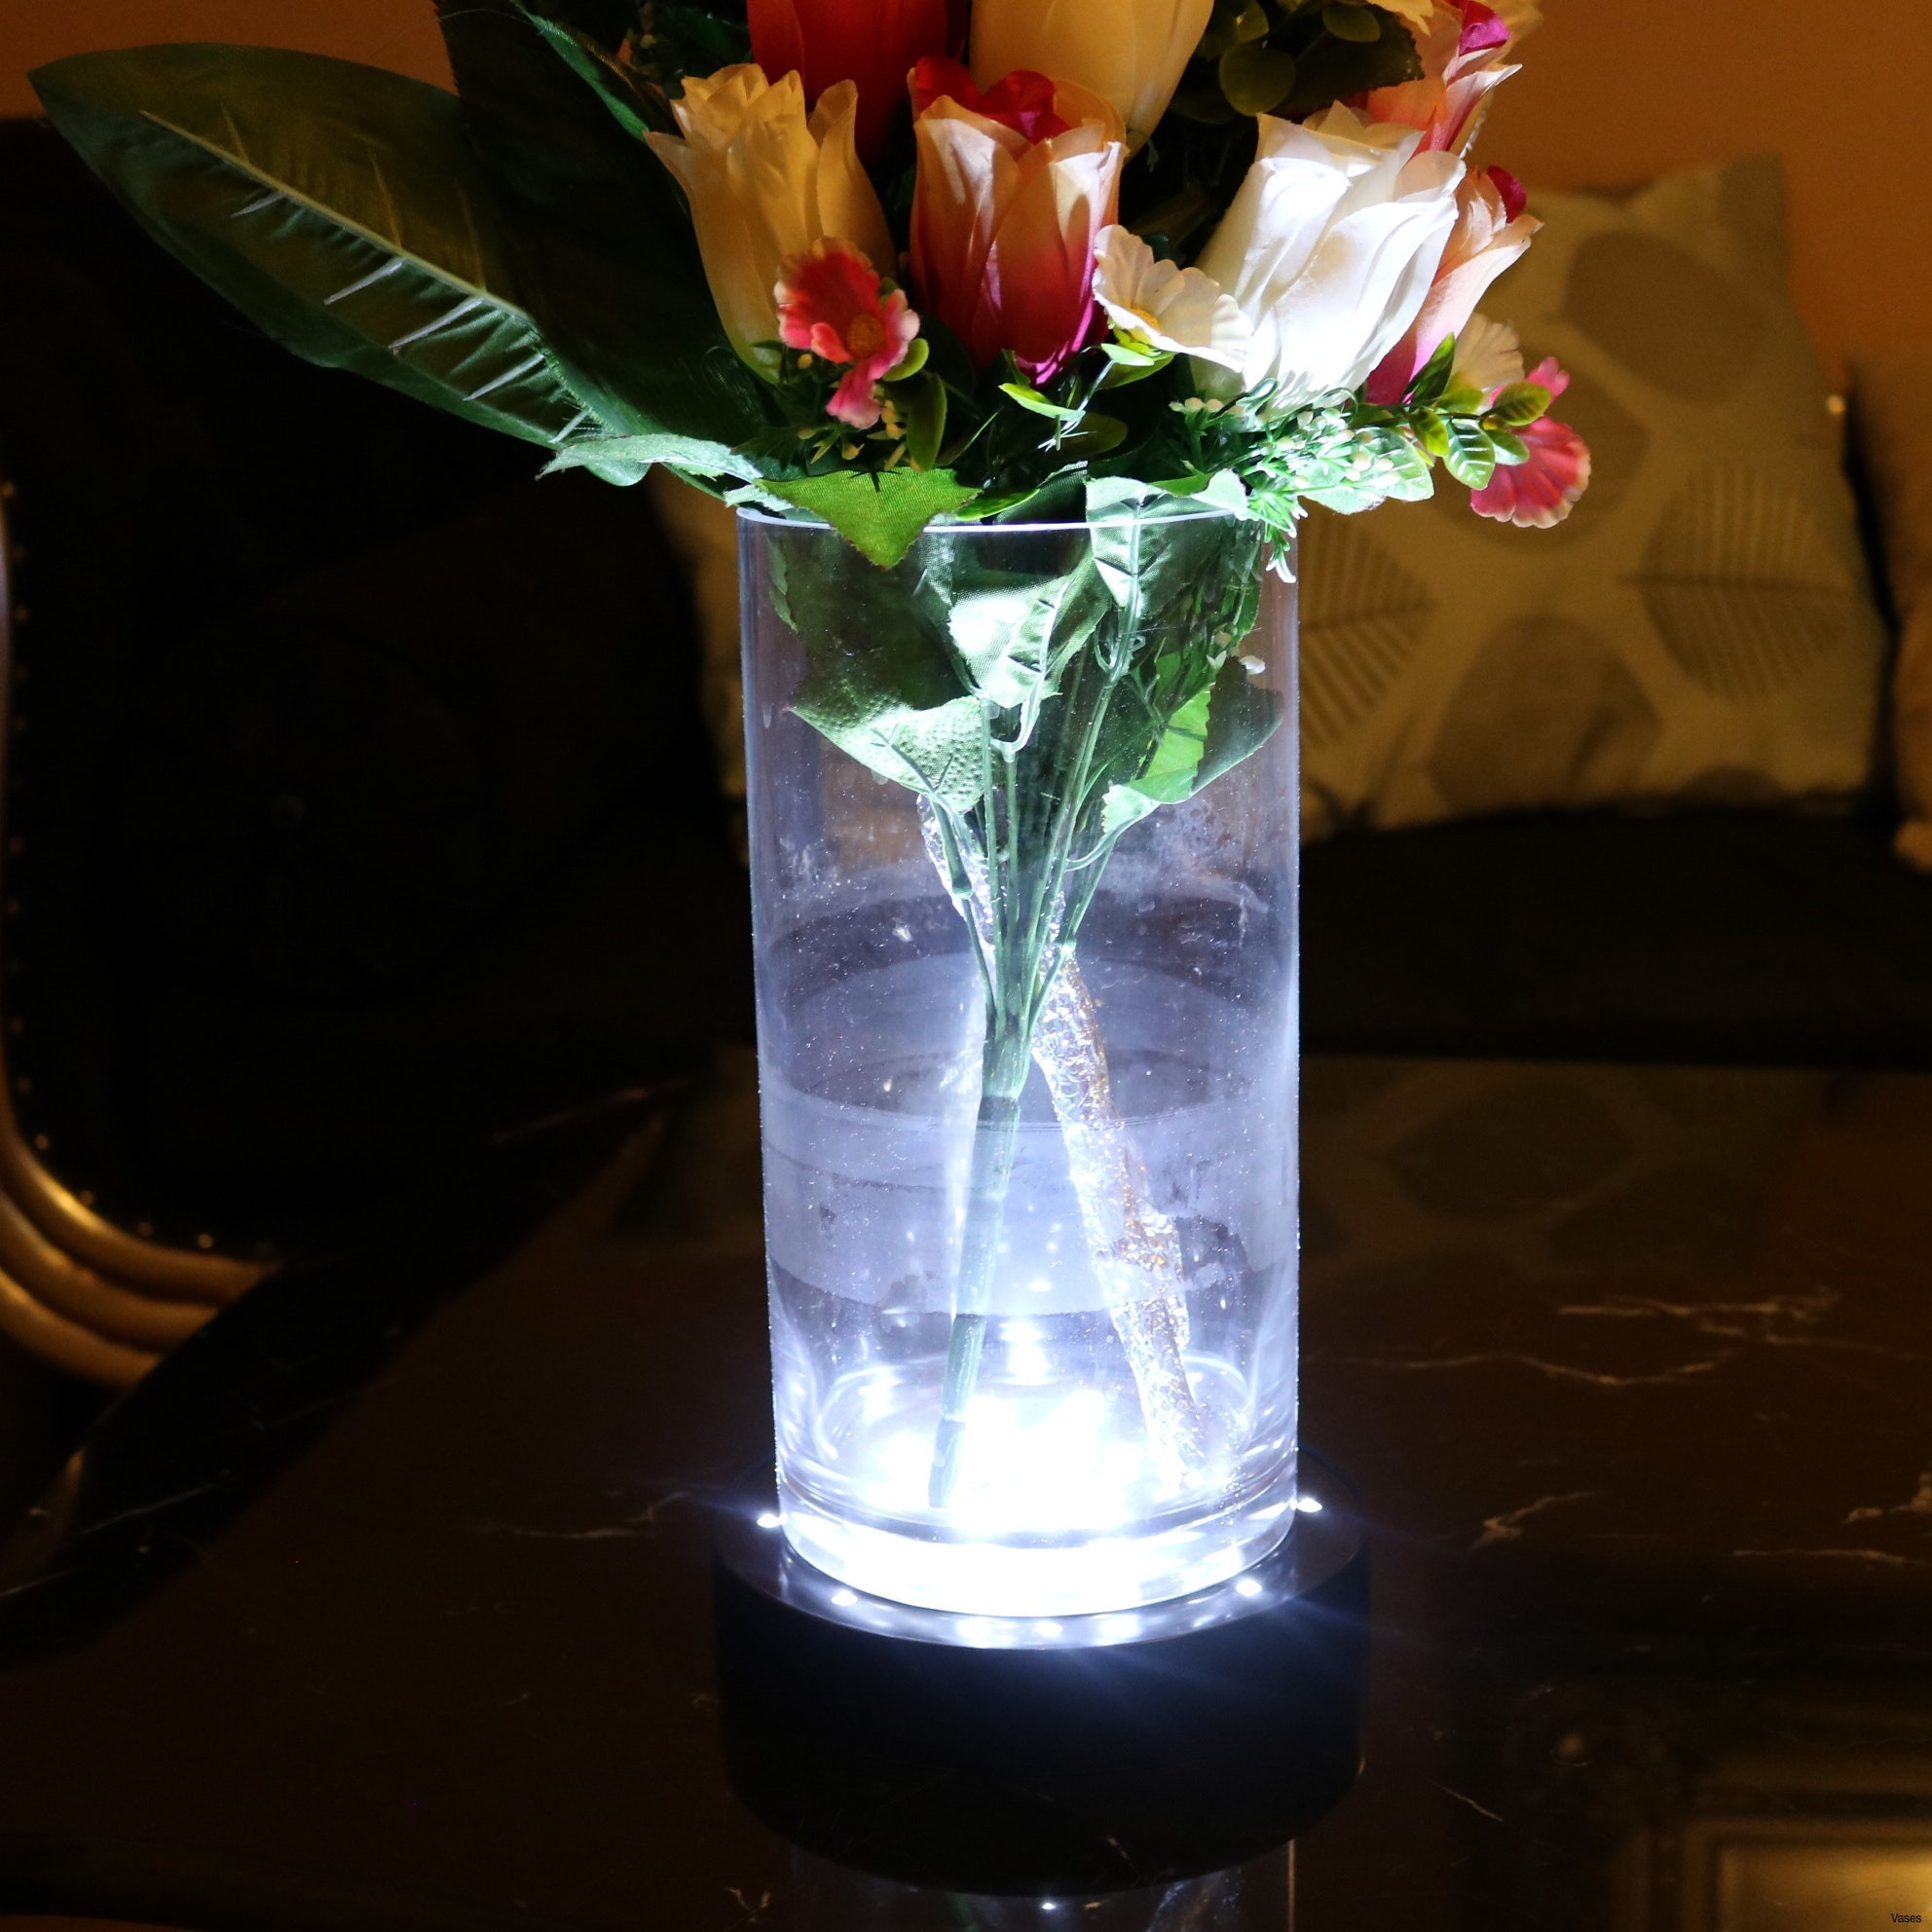 25 attractive Fake Flowers In Water Vase 2024 free download fake flowers in water vase of 15 door decoration with flowers decoration ideas galleries throughout door decoration with flowers vases disposable plastic single cheap flower rose vasei 0d de